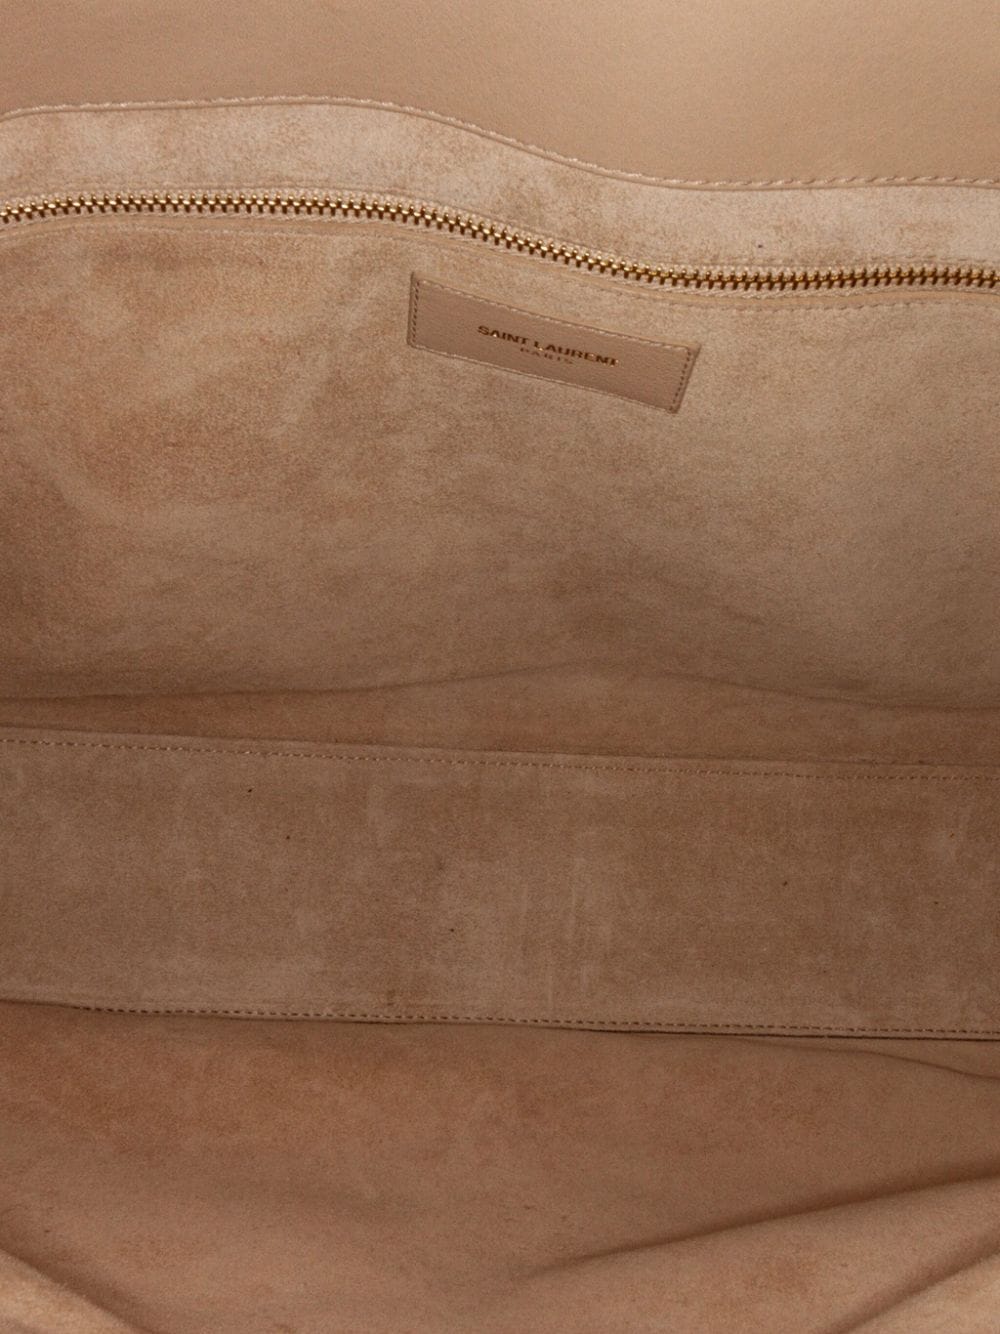 Pre-owned Saint Laurent 2013-present Large East/west Shopping Tote Bag In Brown